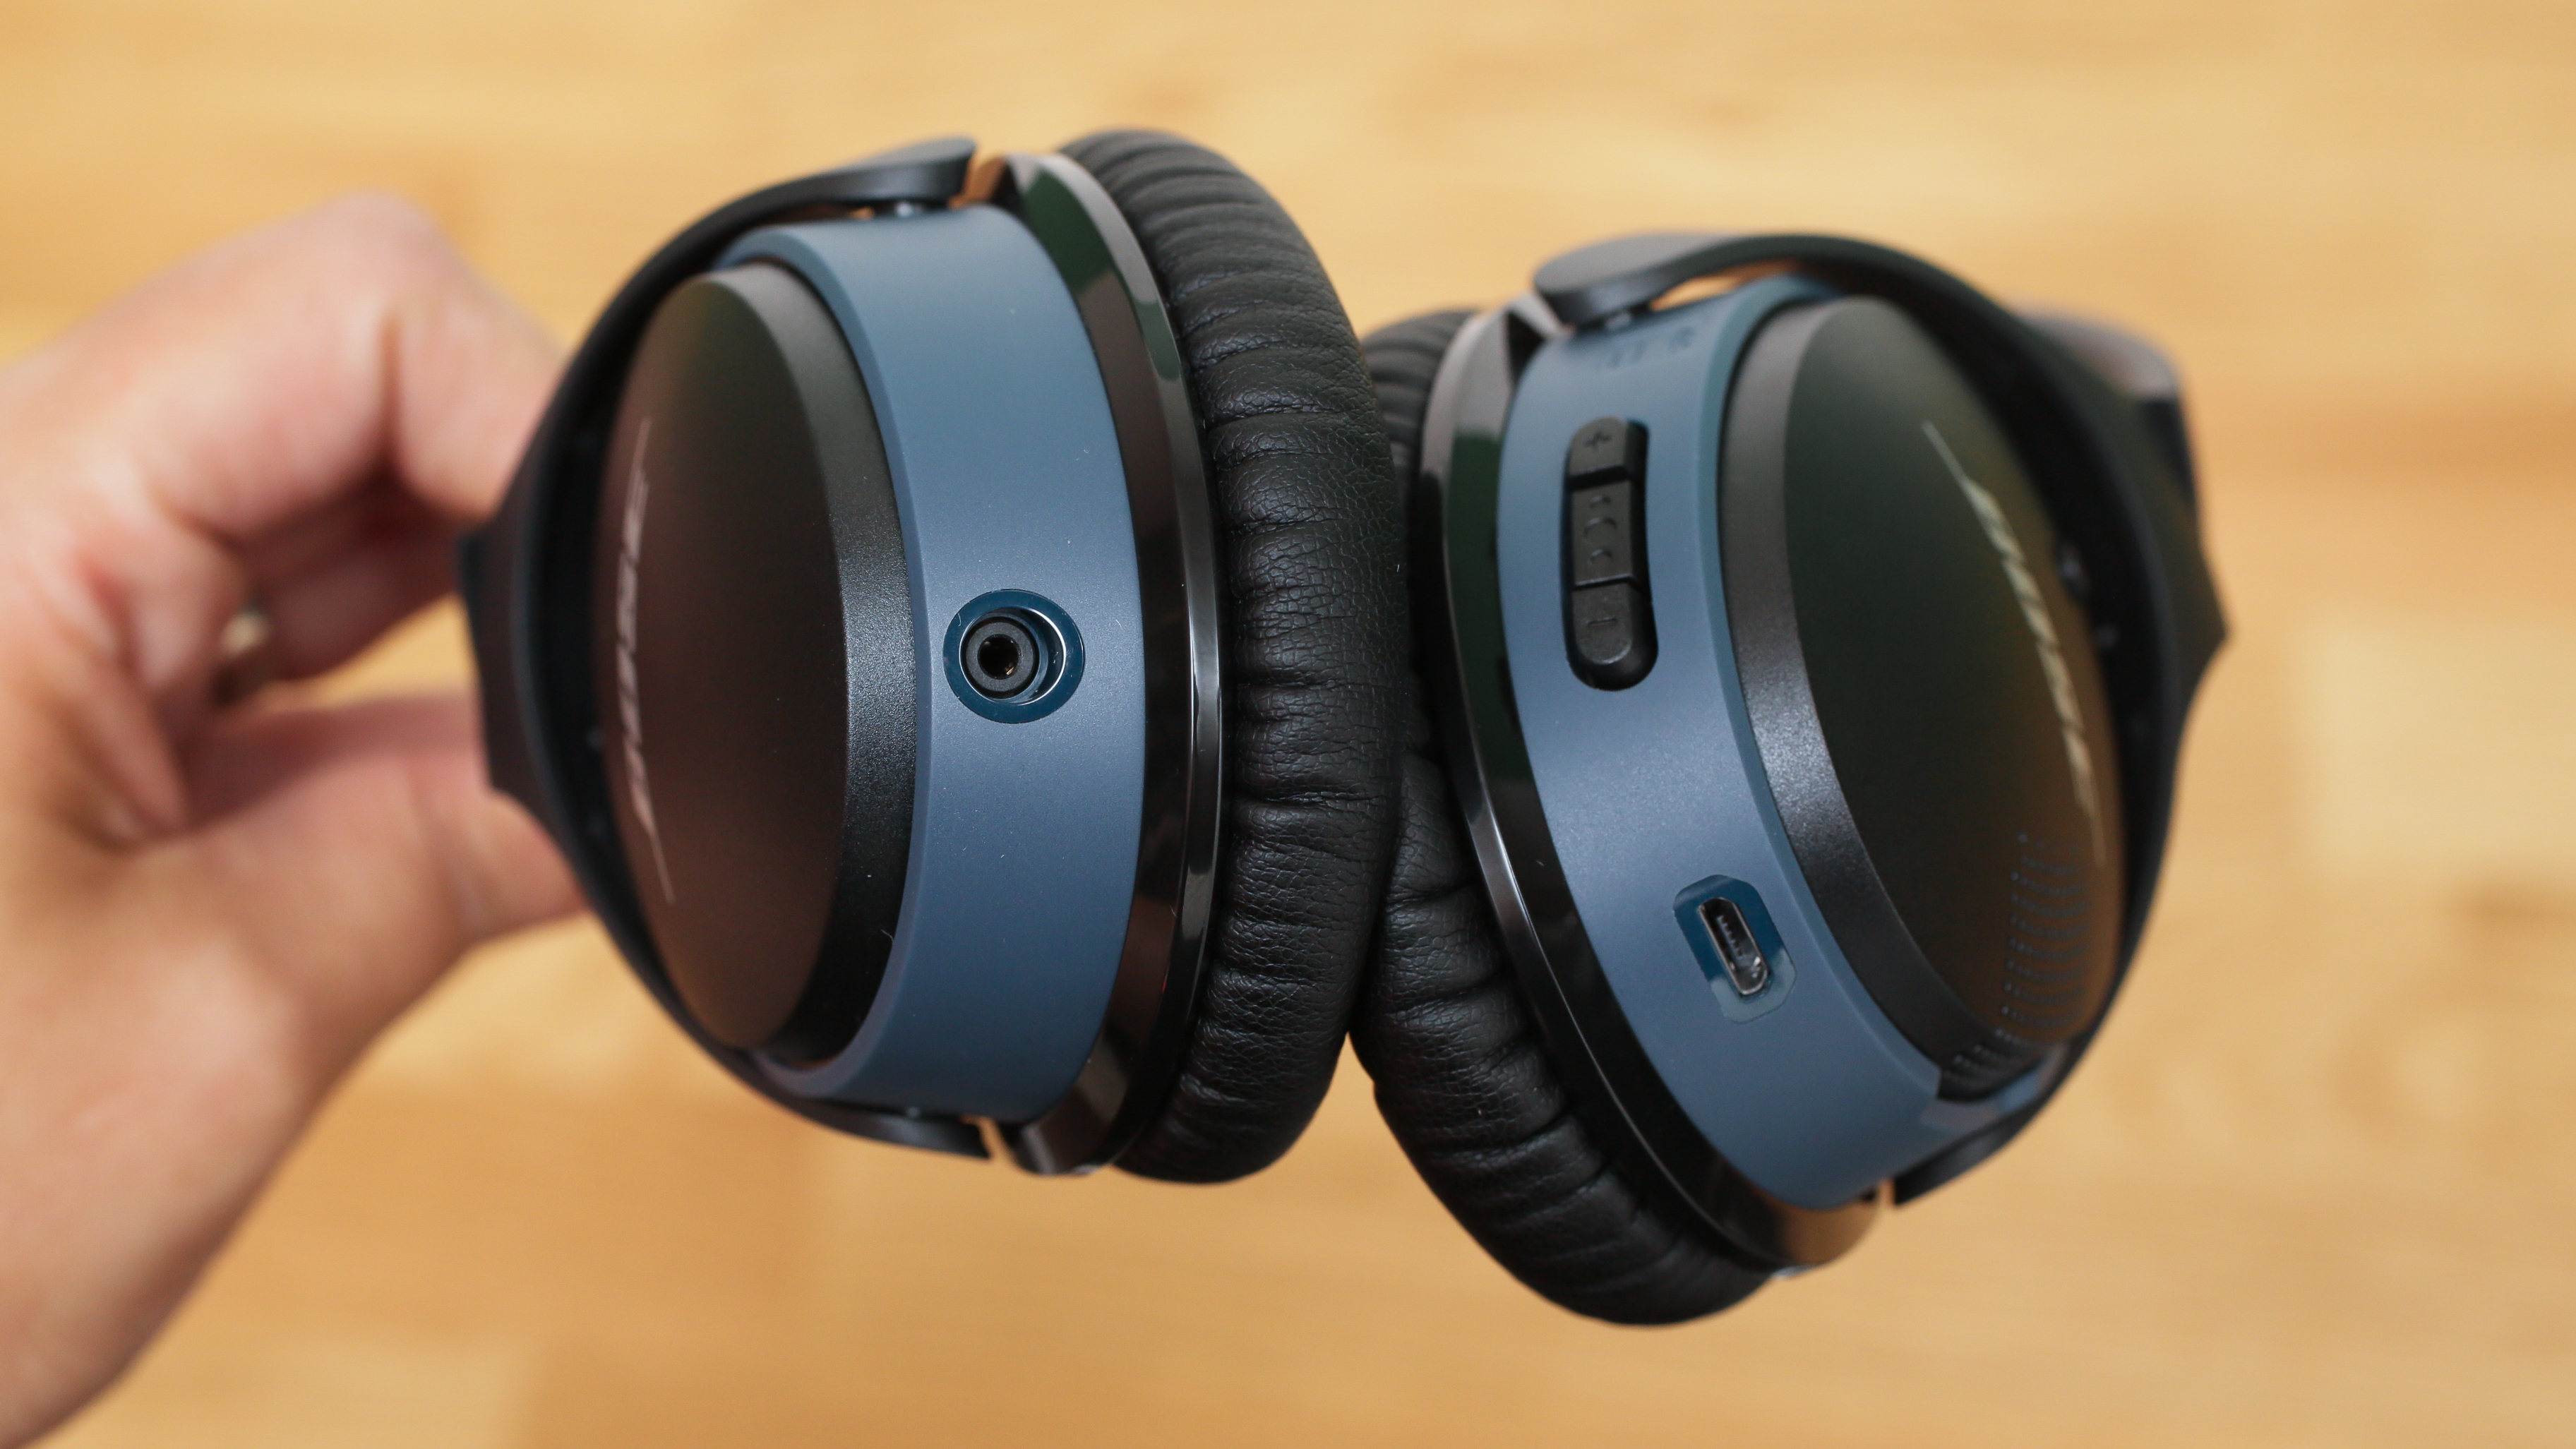 Supersonic speed wealth after that Bose SoundLink Around-Ear Wireless Headphones II review: A very comfortable  Bluetooth headphone with strong performance - CNET